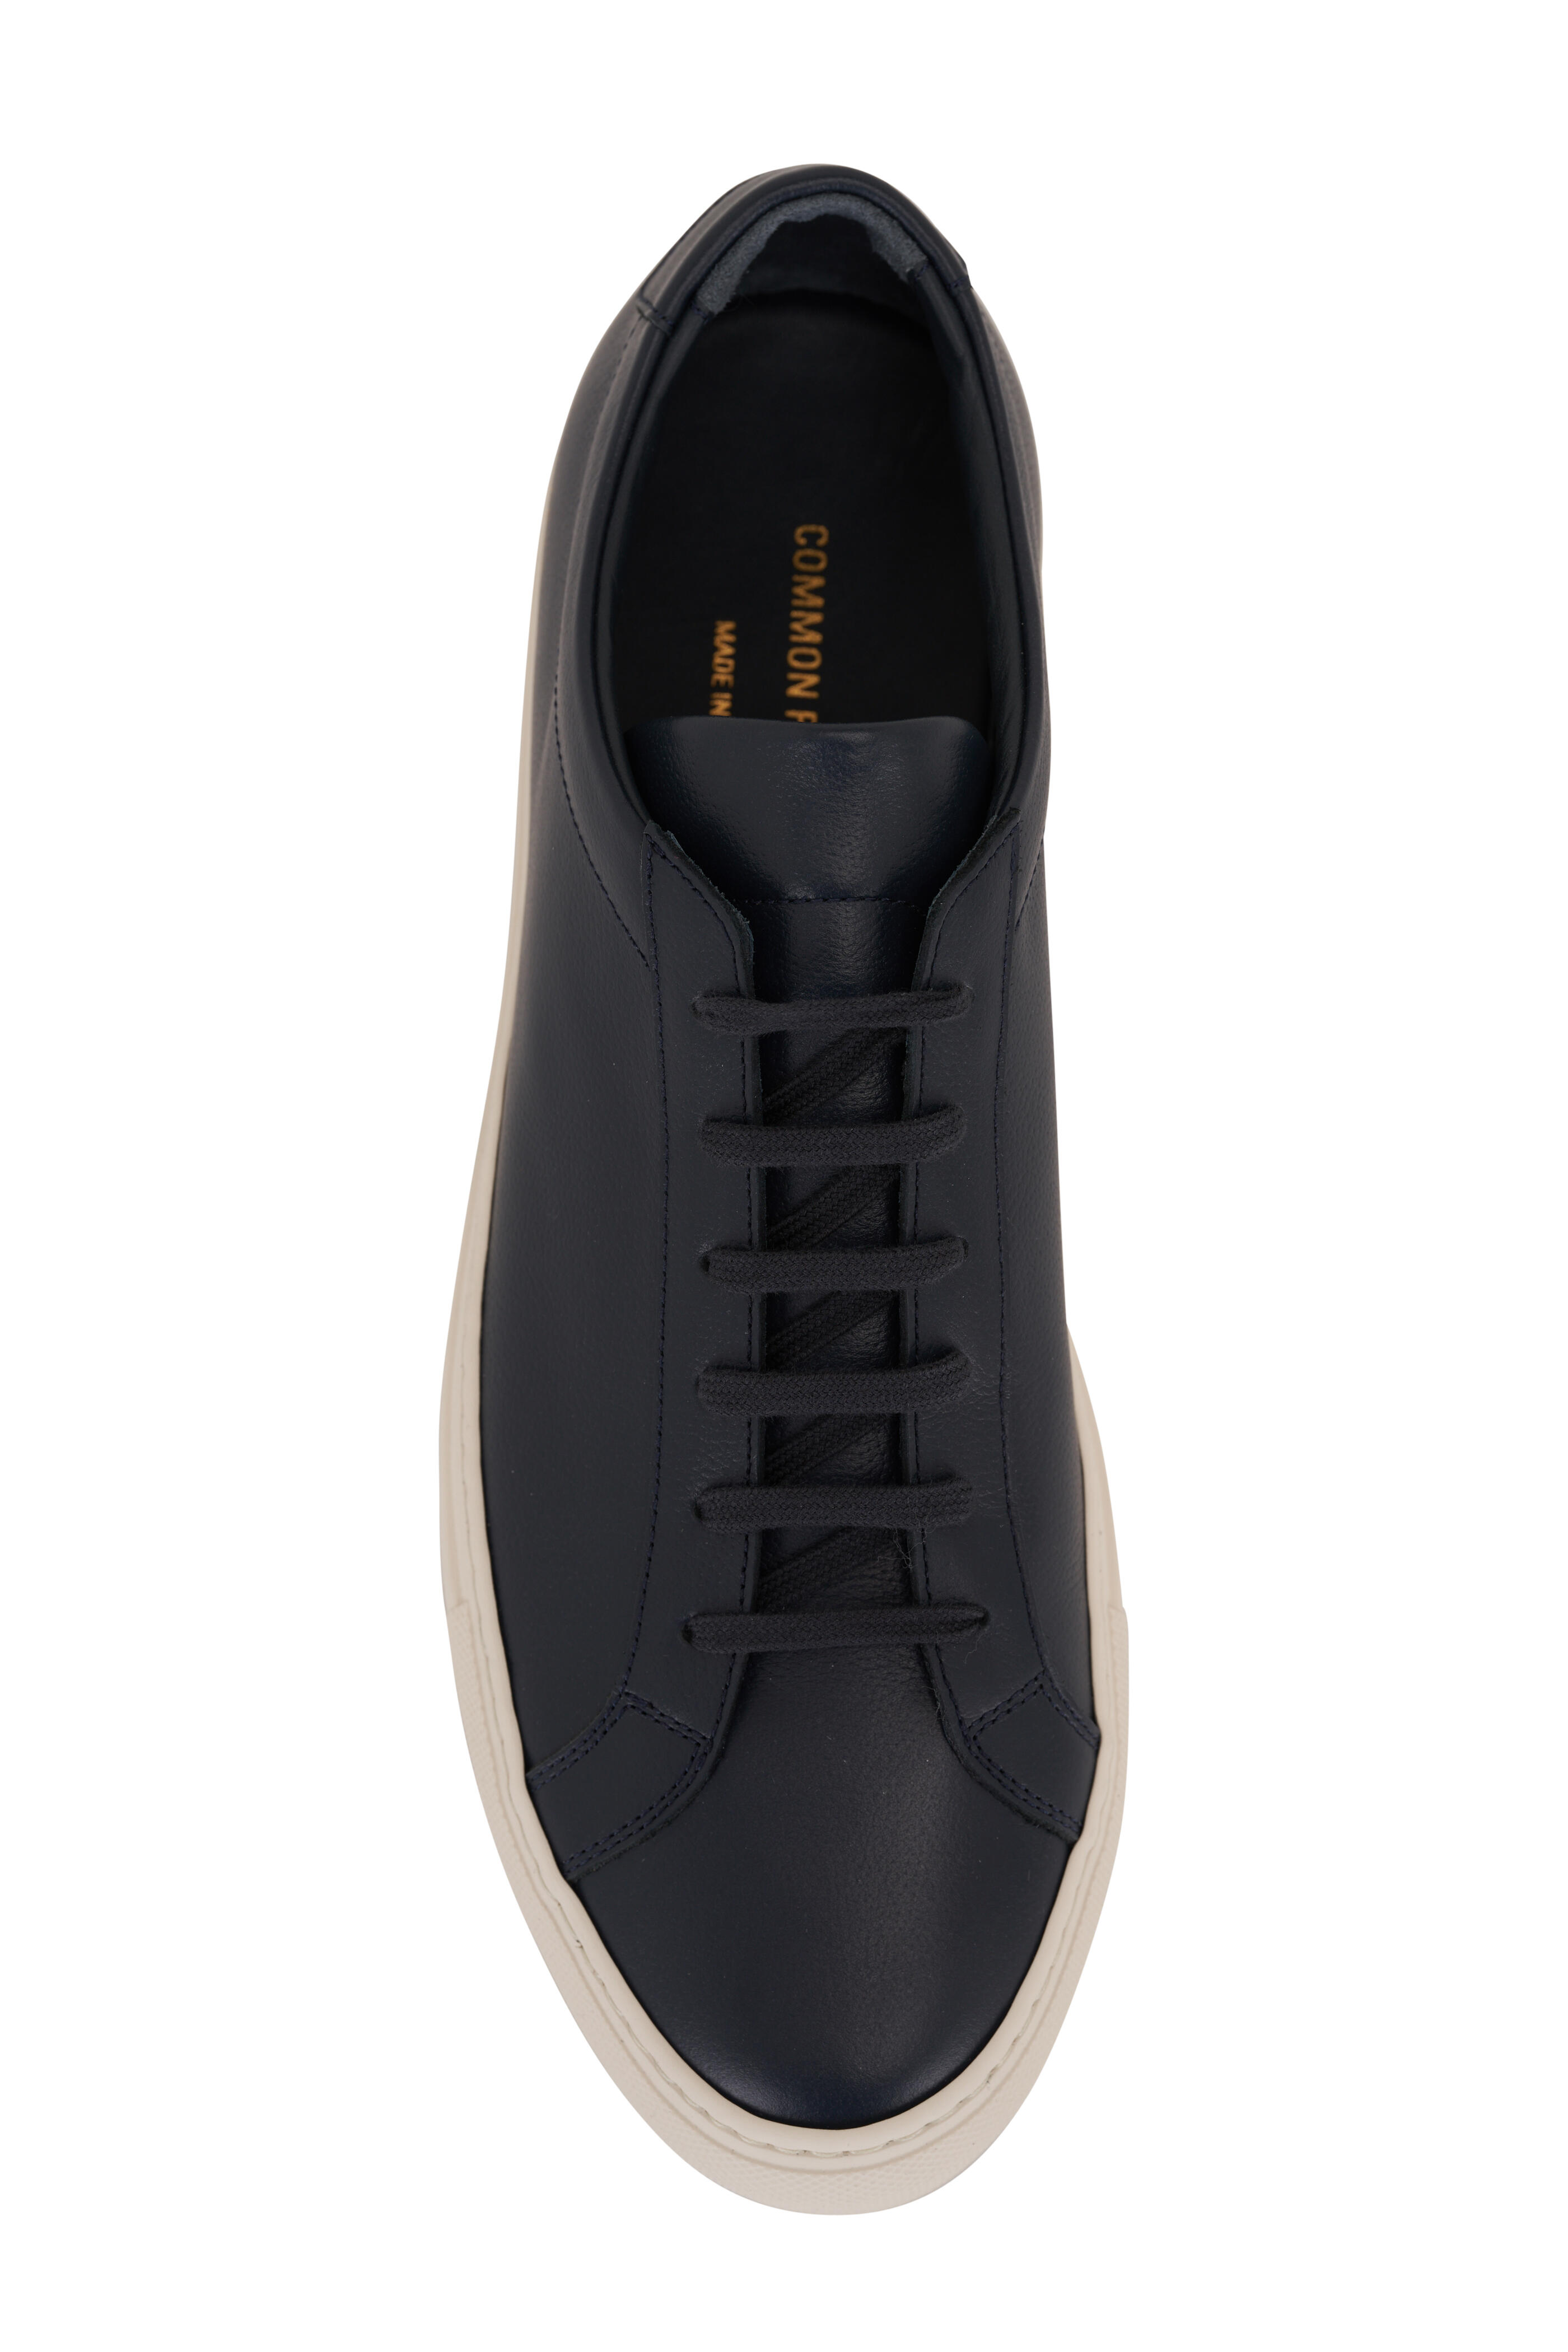 Common Projects - Achilles Navy Leather Low Top Sneaker